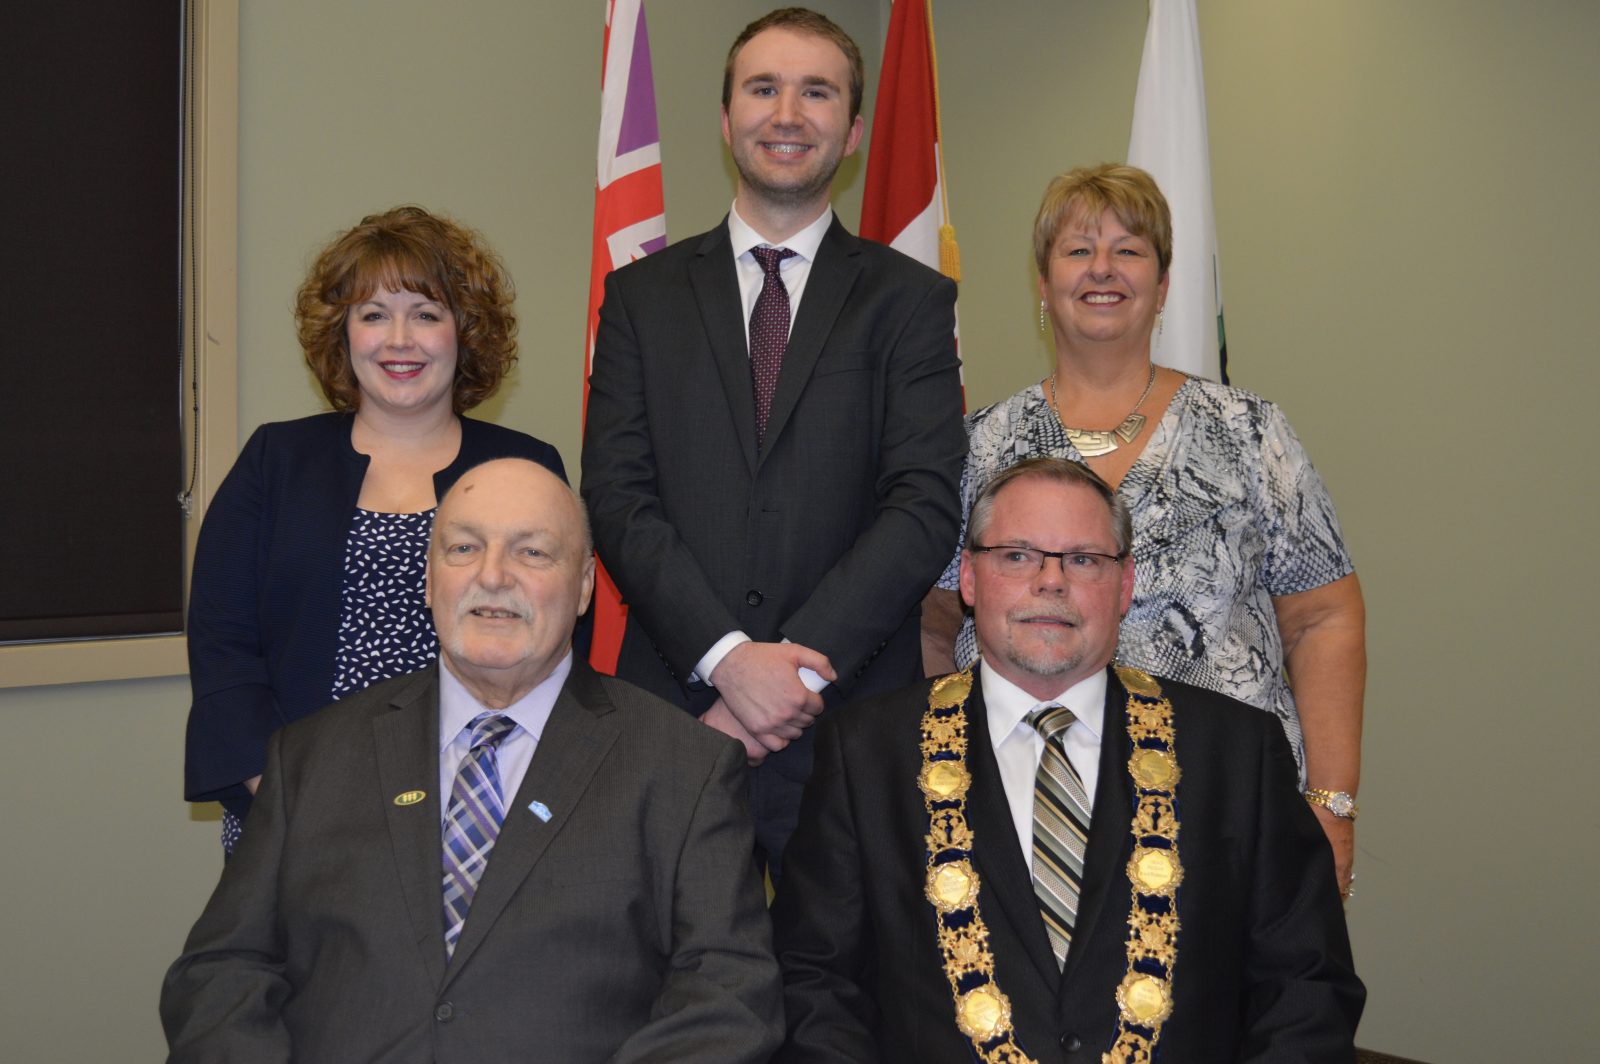 South Stormont welcomes new Mayor and Council